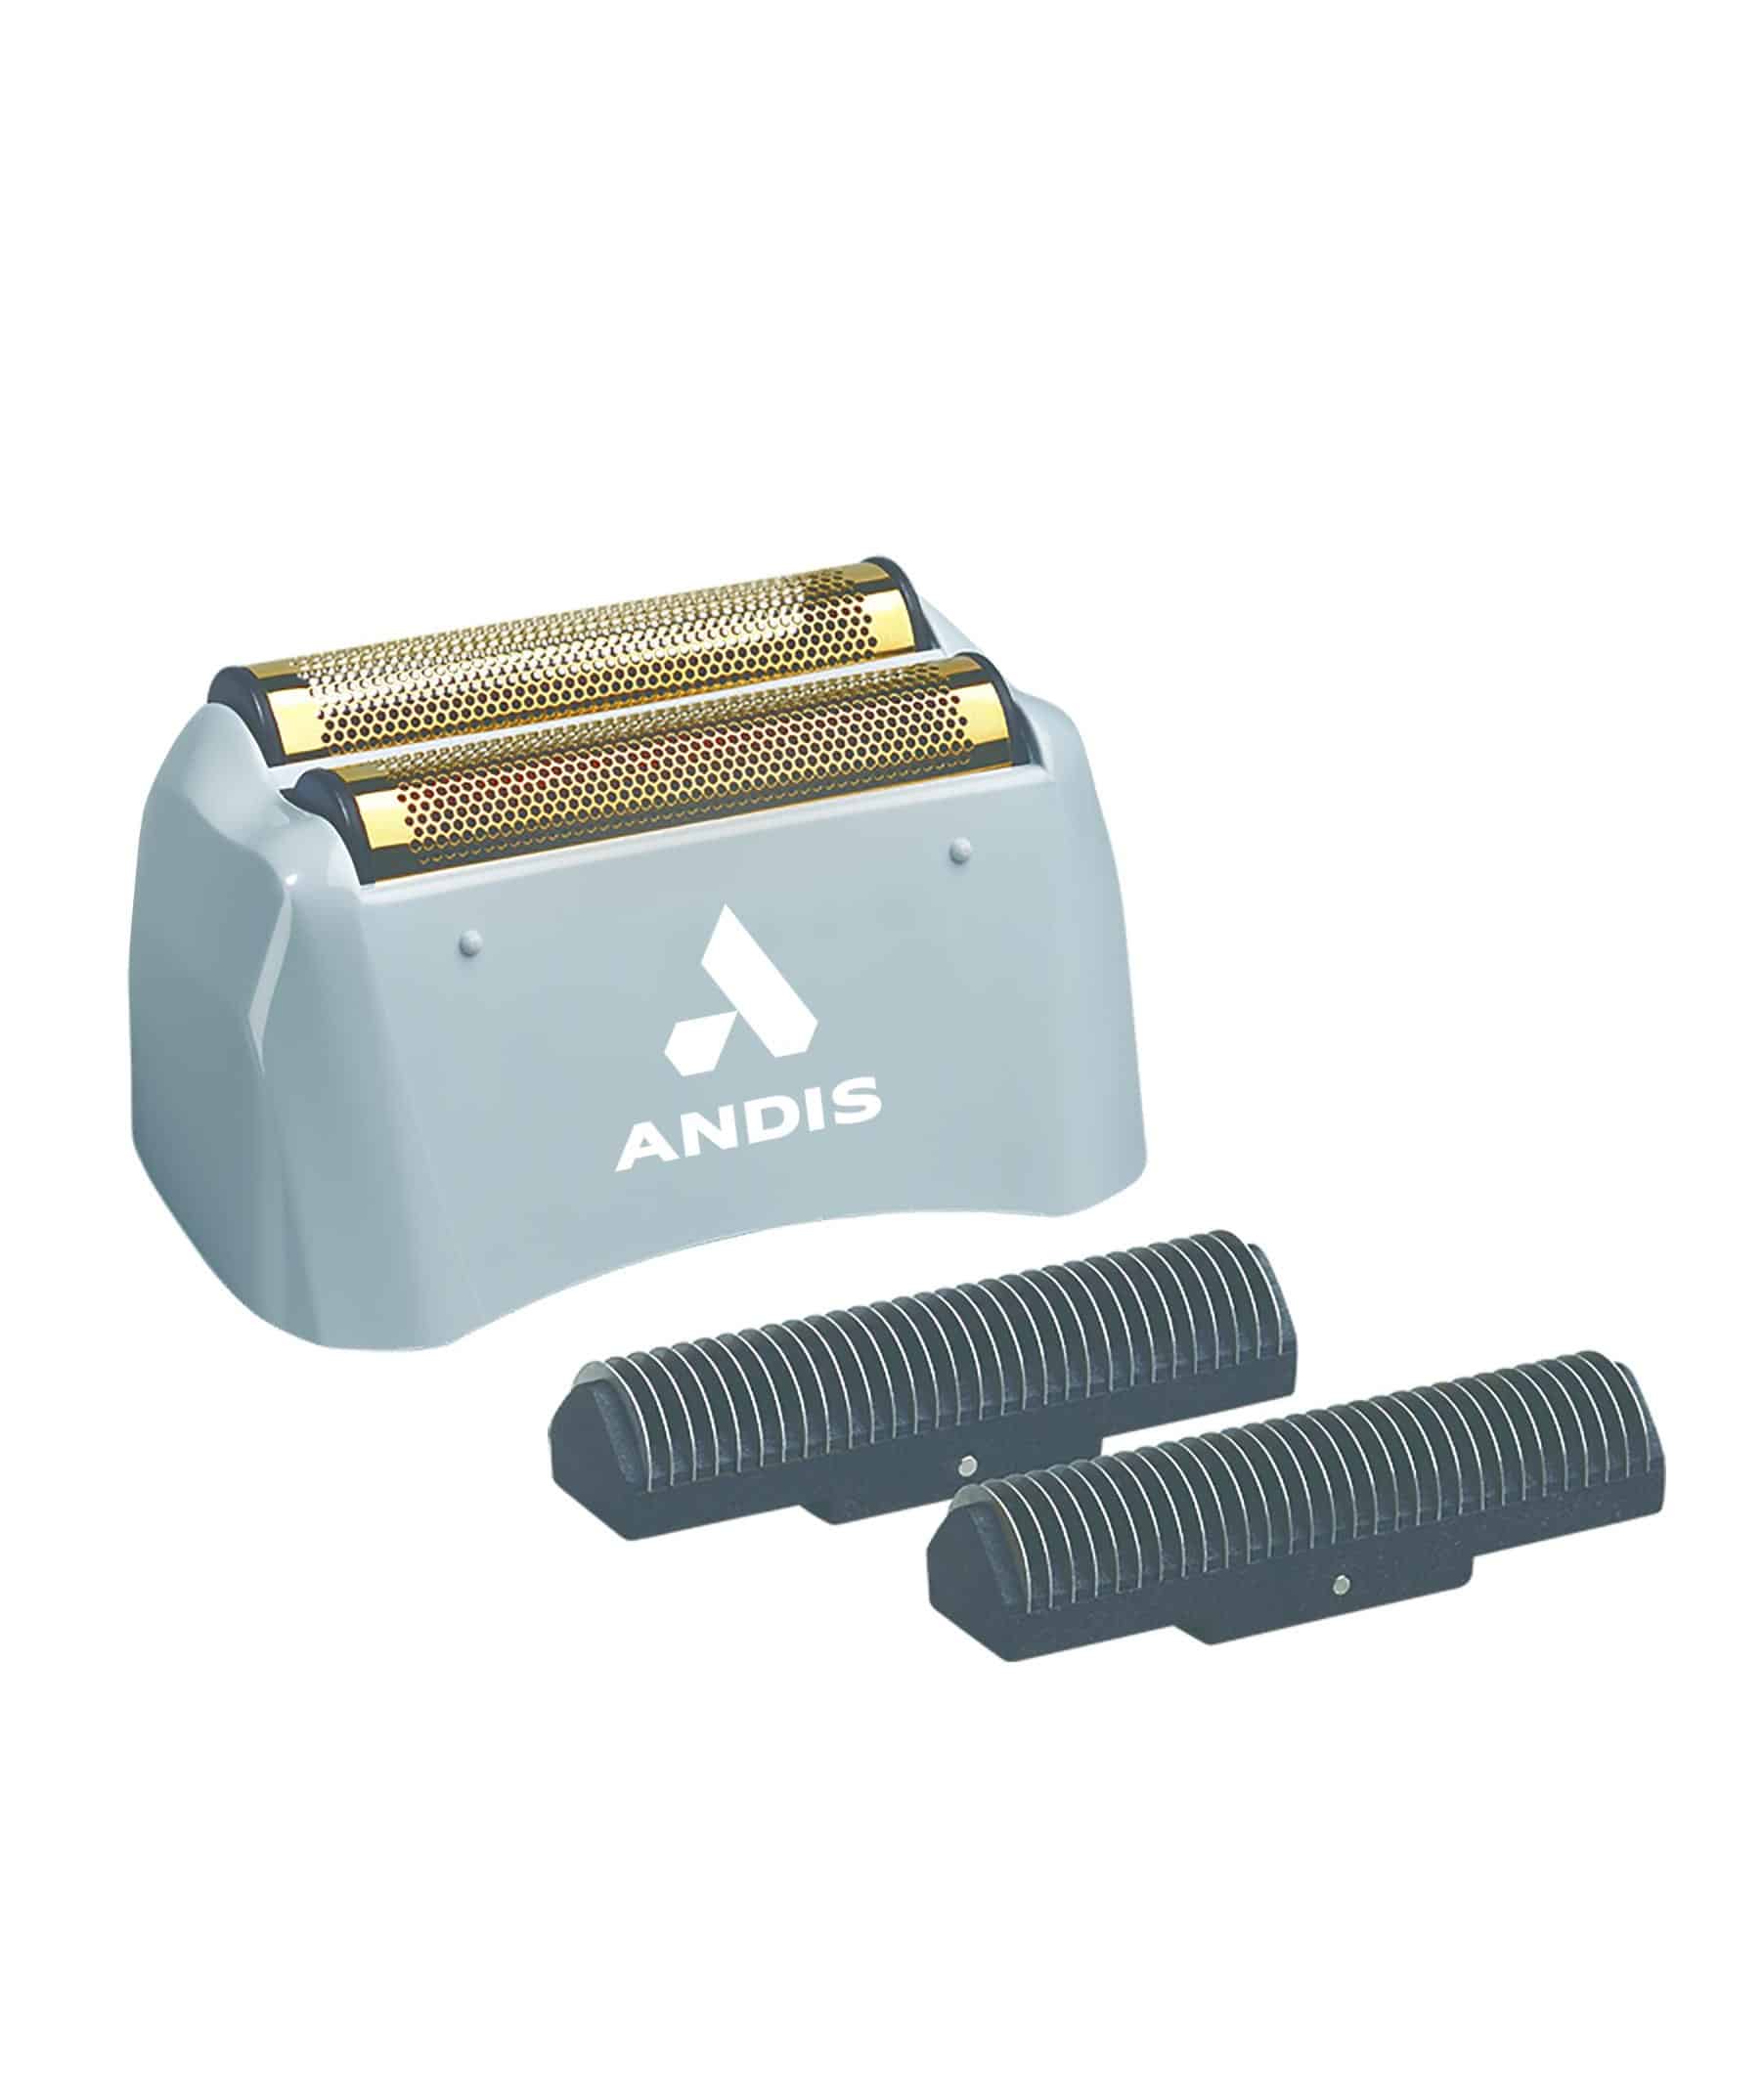 Andis Profoil Shaver Replacement Foil and Cutters #17825